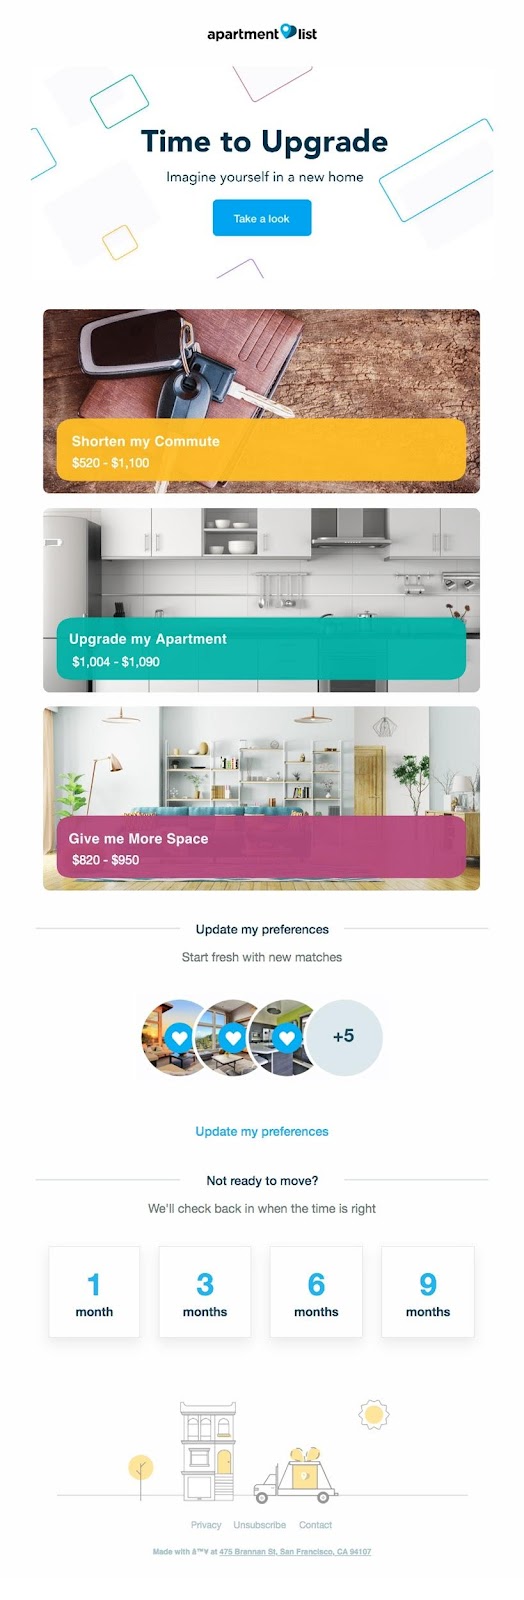 Apartment List email example